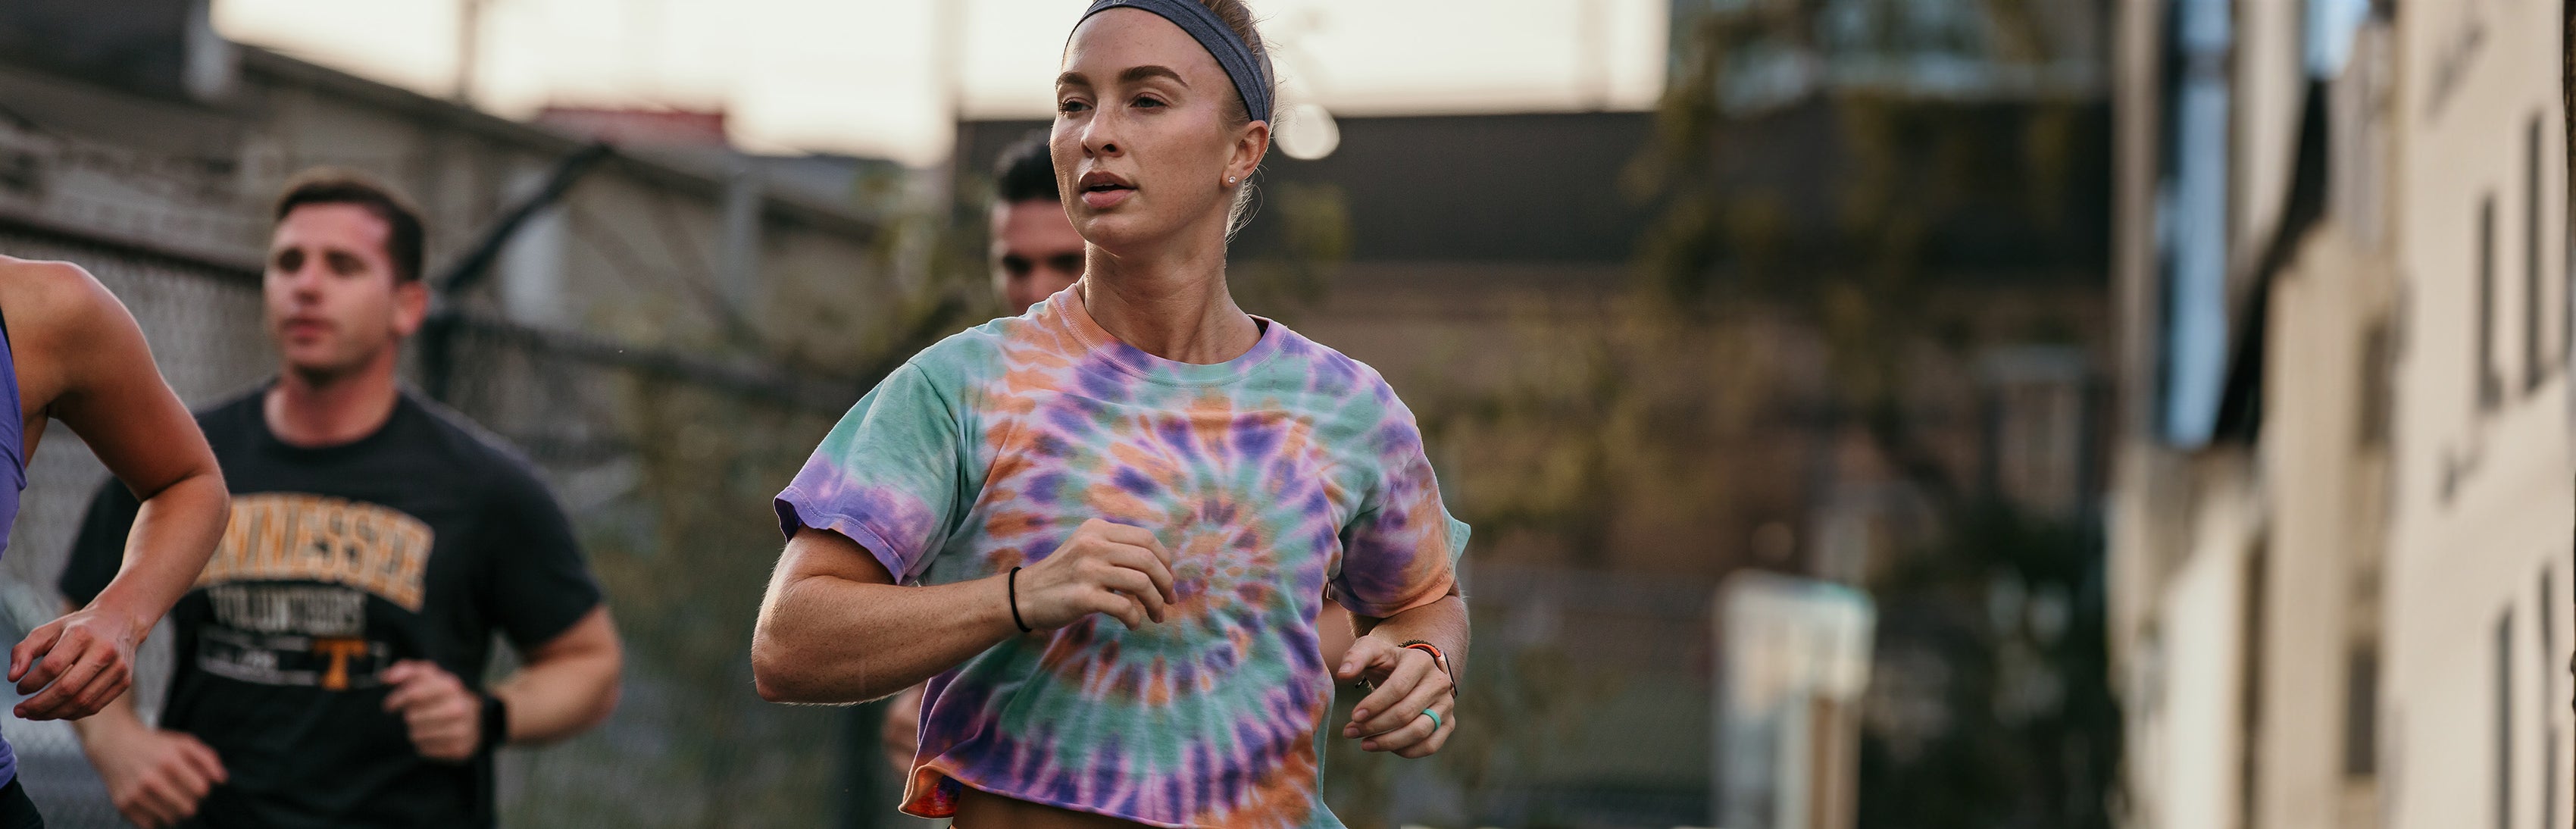 woman running wearing a Groove Life ring